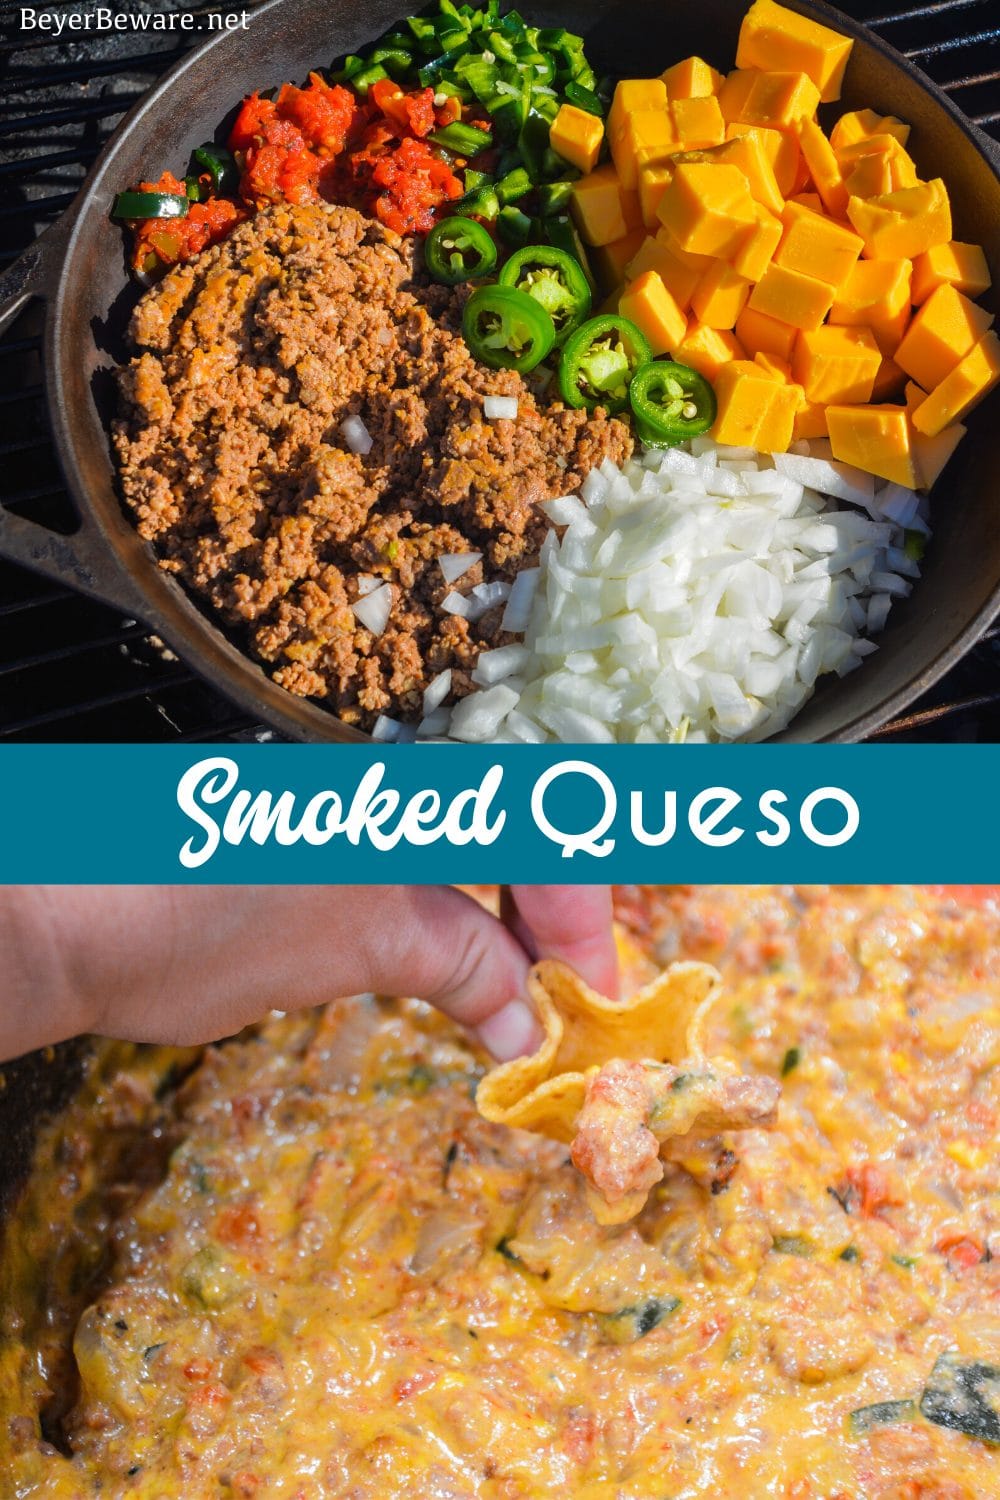 Smoked Queso Dip - Sausage Queso on the Grill